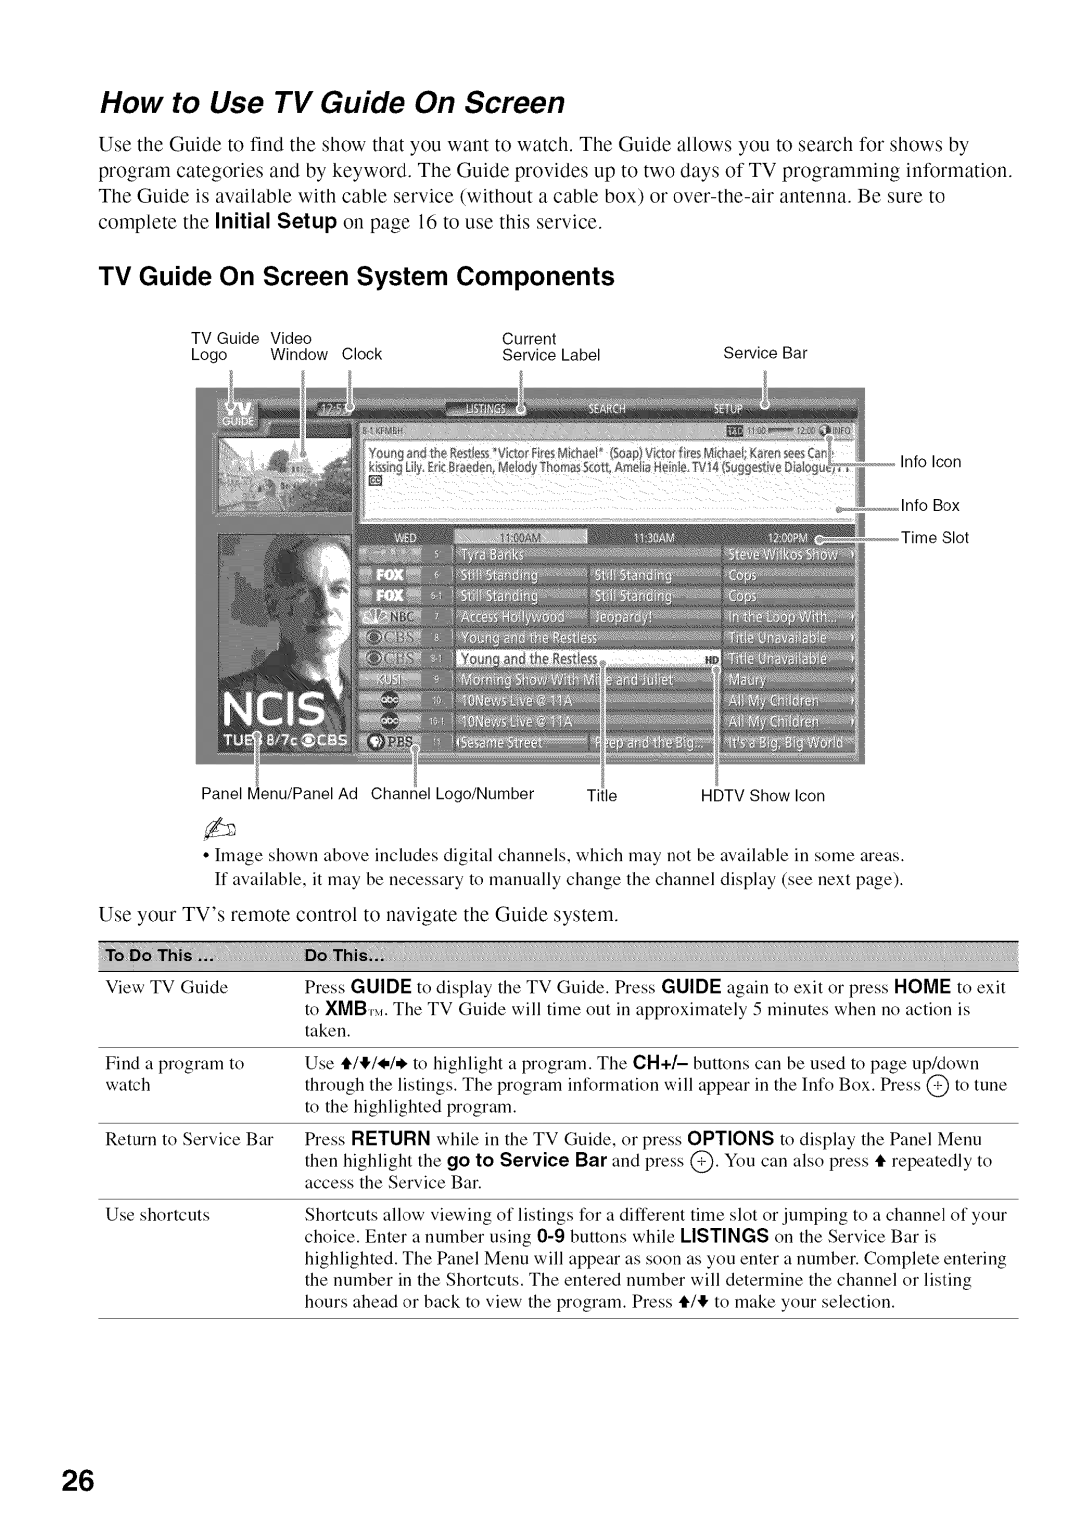 Sony KDL52V4100 operating instructions How to Use TV Guide On Screen, TV Guide On Screen System Components, Listings 